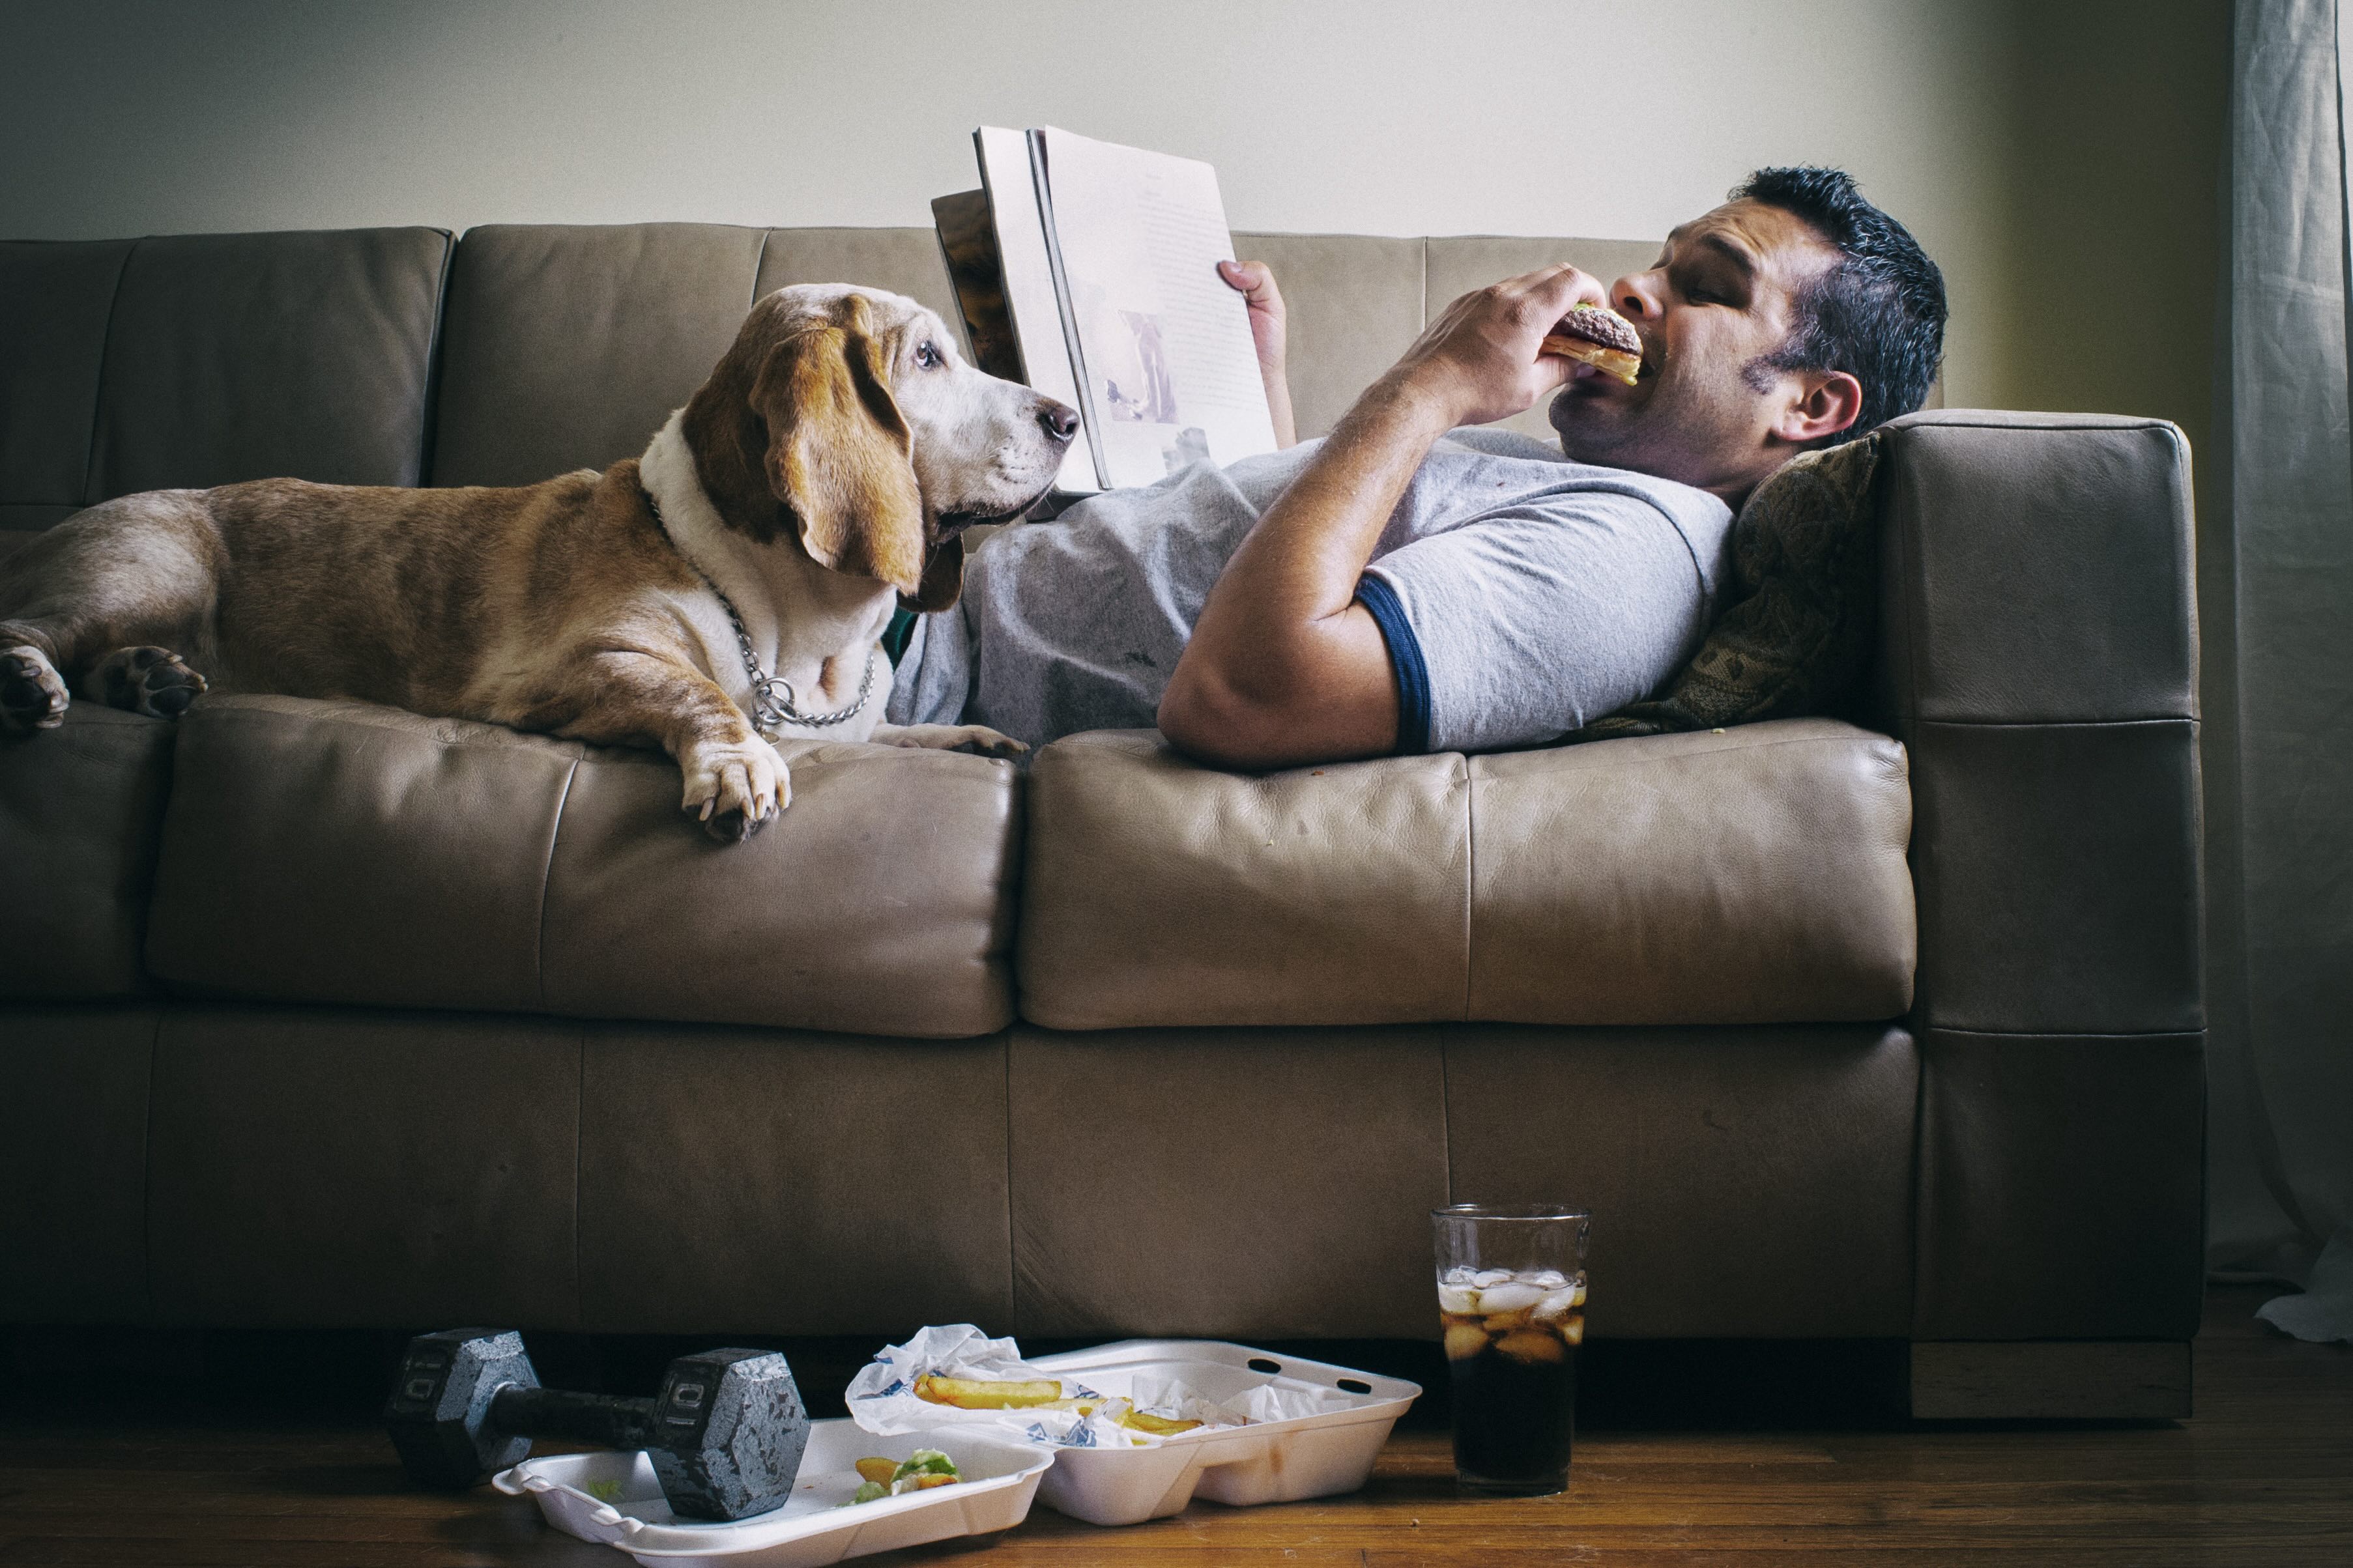 A man eating a hamburger reading a fitness magazine while his dog watches.